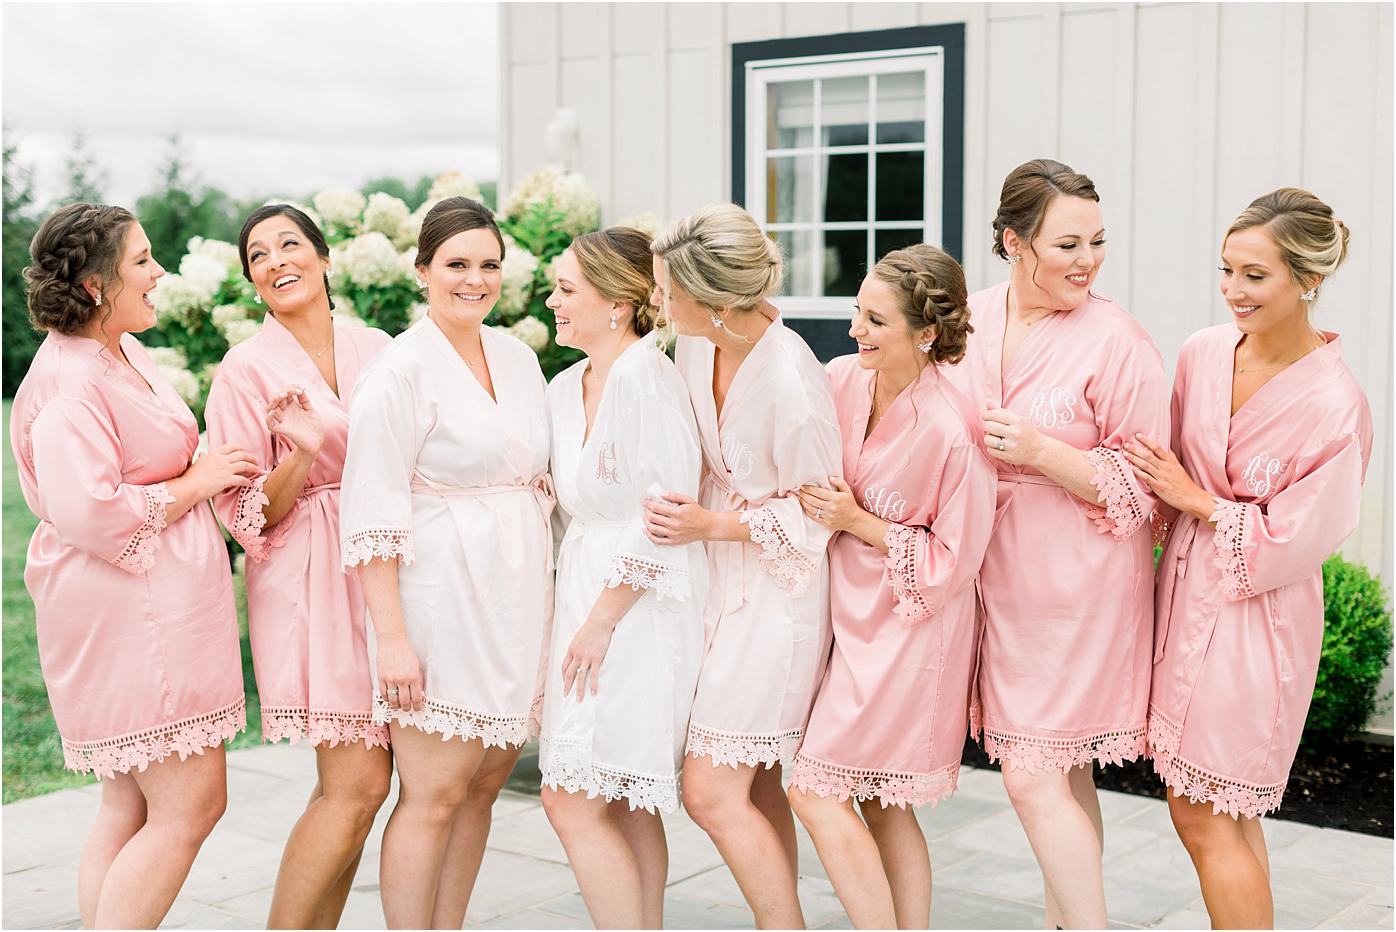 Robe picture with bride and bridesmaids in front of Shadow Creek wedding and events barn